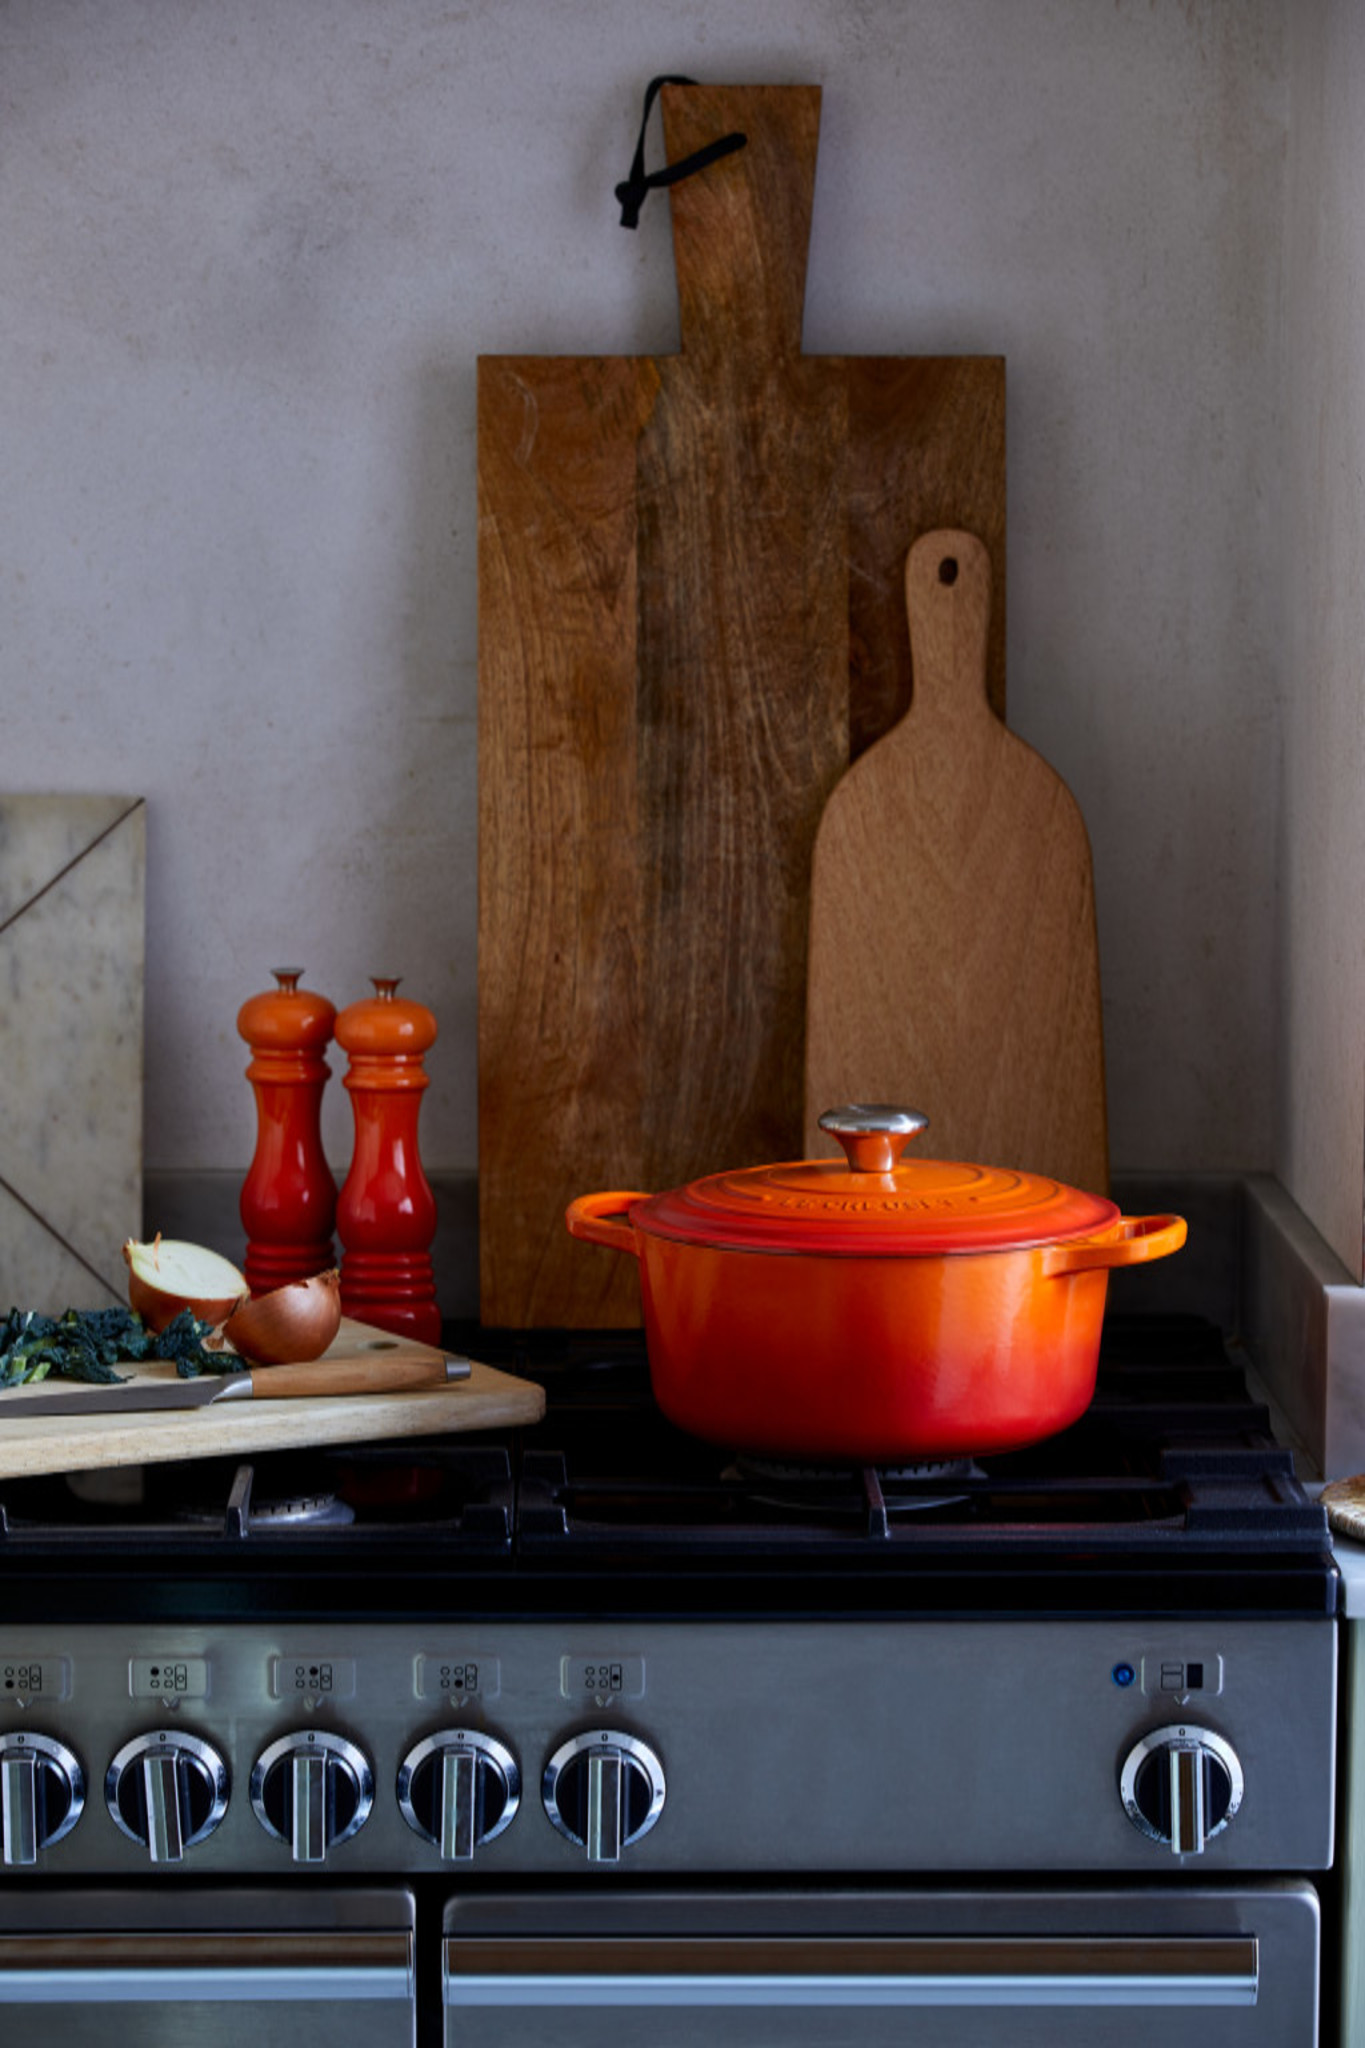 From casseroles and cookware sets to frying pans and woks, Le Creuset offers cast iron classics and modern kitchen essentials (photo © Le Creuset).